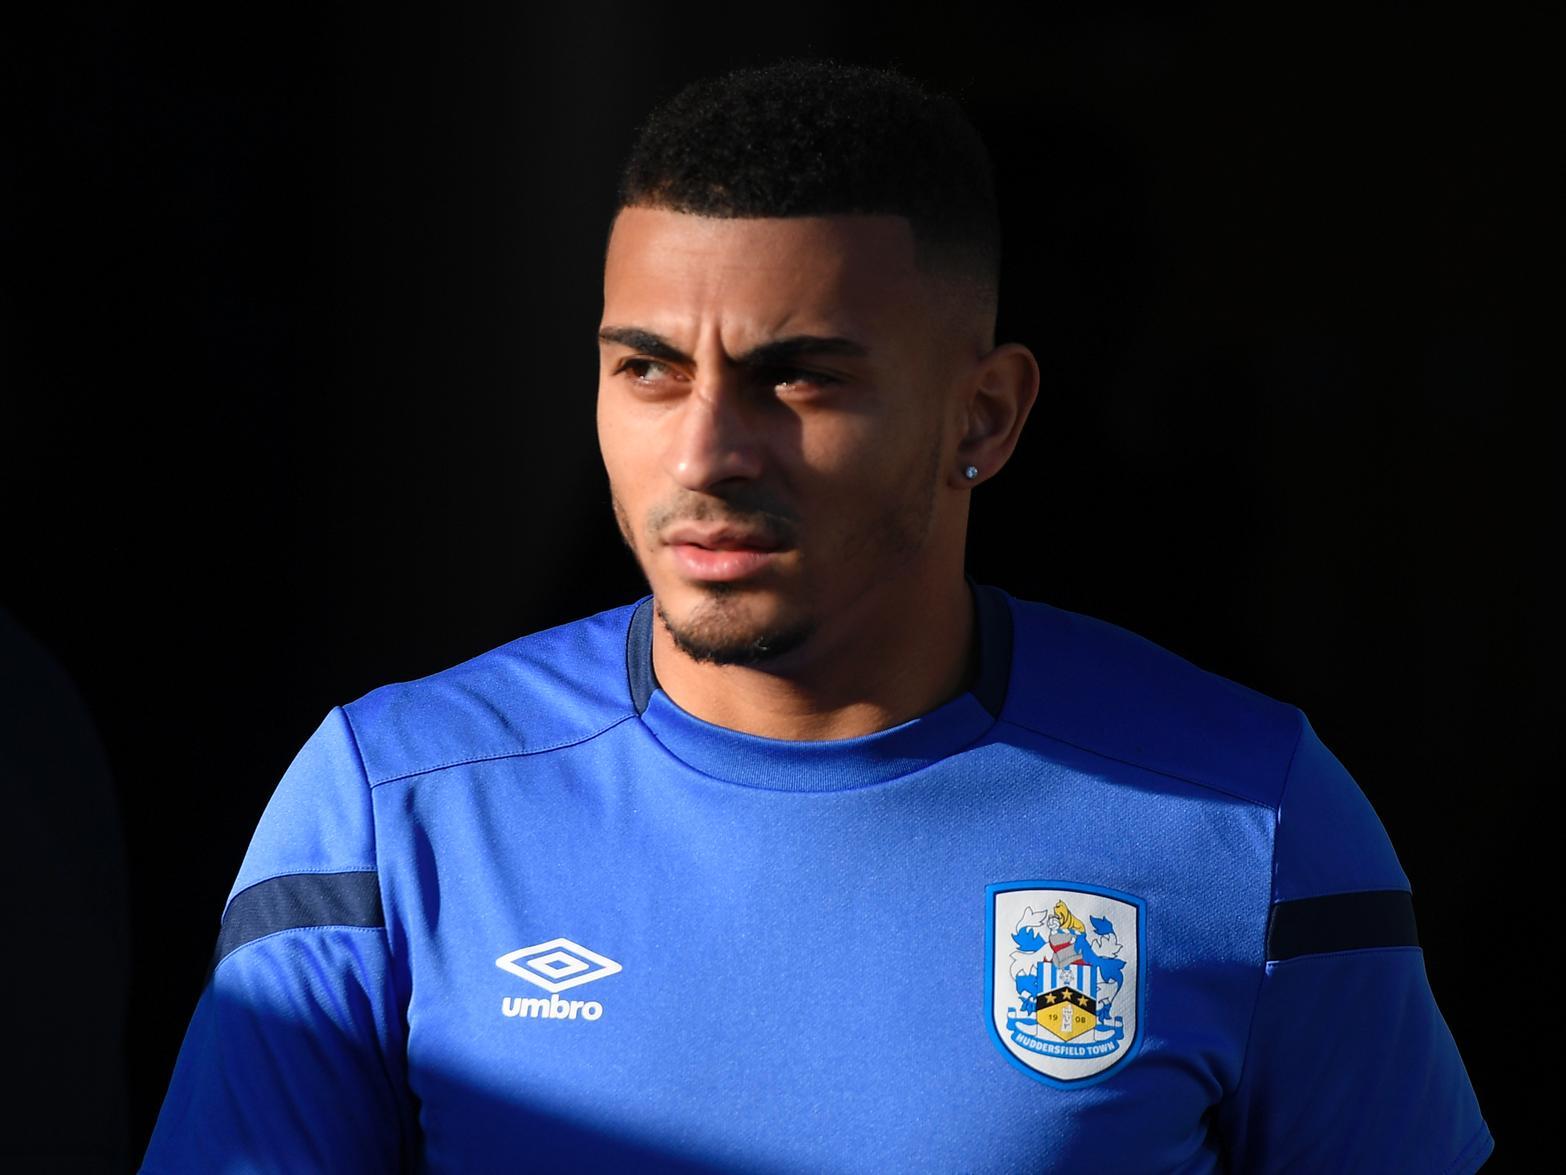 Huddersfield Town striker Steve Mounie has backed teammate Karlan Grant to hit the 20-goal mark for the Terriers before the end of the season, insisting that the 22-year-old deserves to reach the milestone. (Huddersfield Examiner)